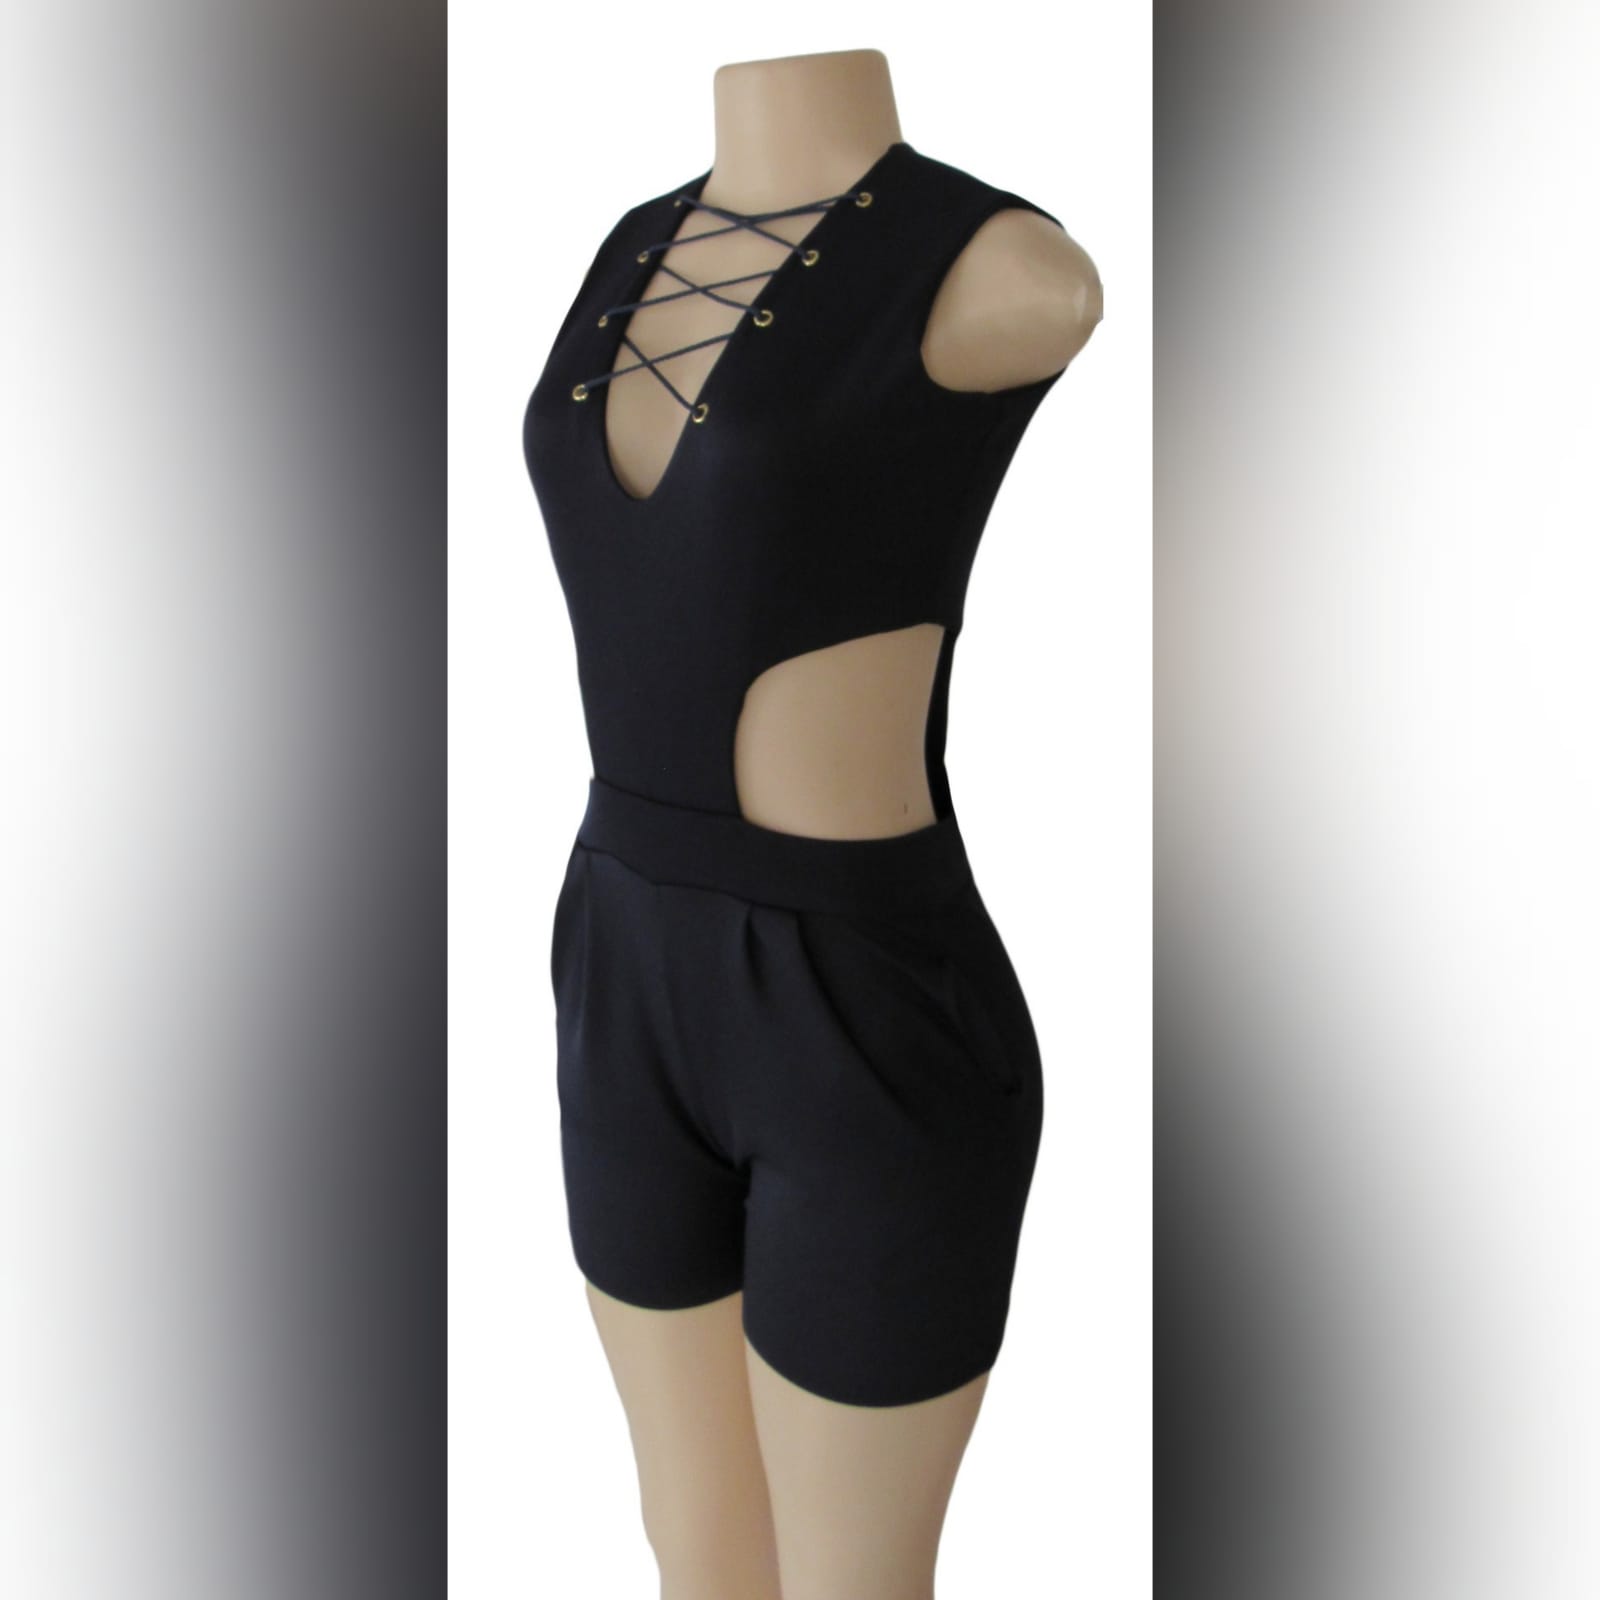 Navy blue smart casual bodysuit 1 navy blue smart casual bodysuit, with side tummy openings, v neckline detailed with lace-up detail, and back with a gold zipper.